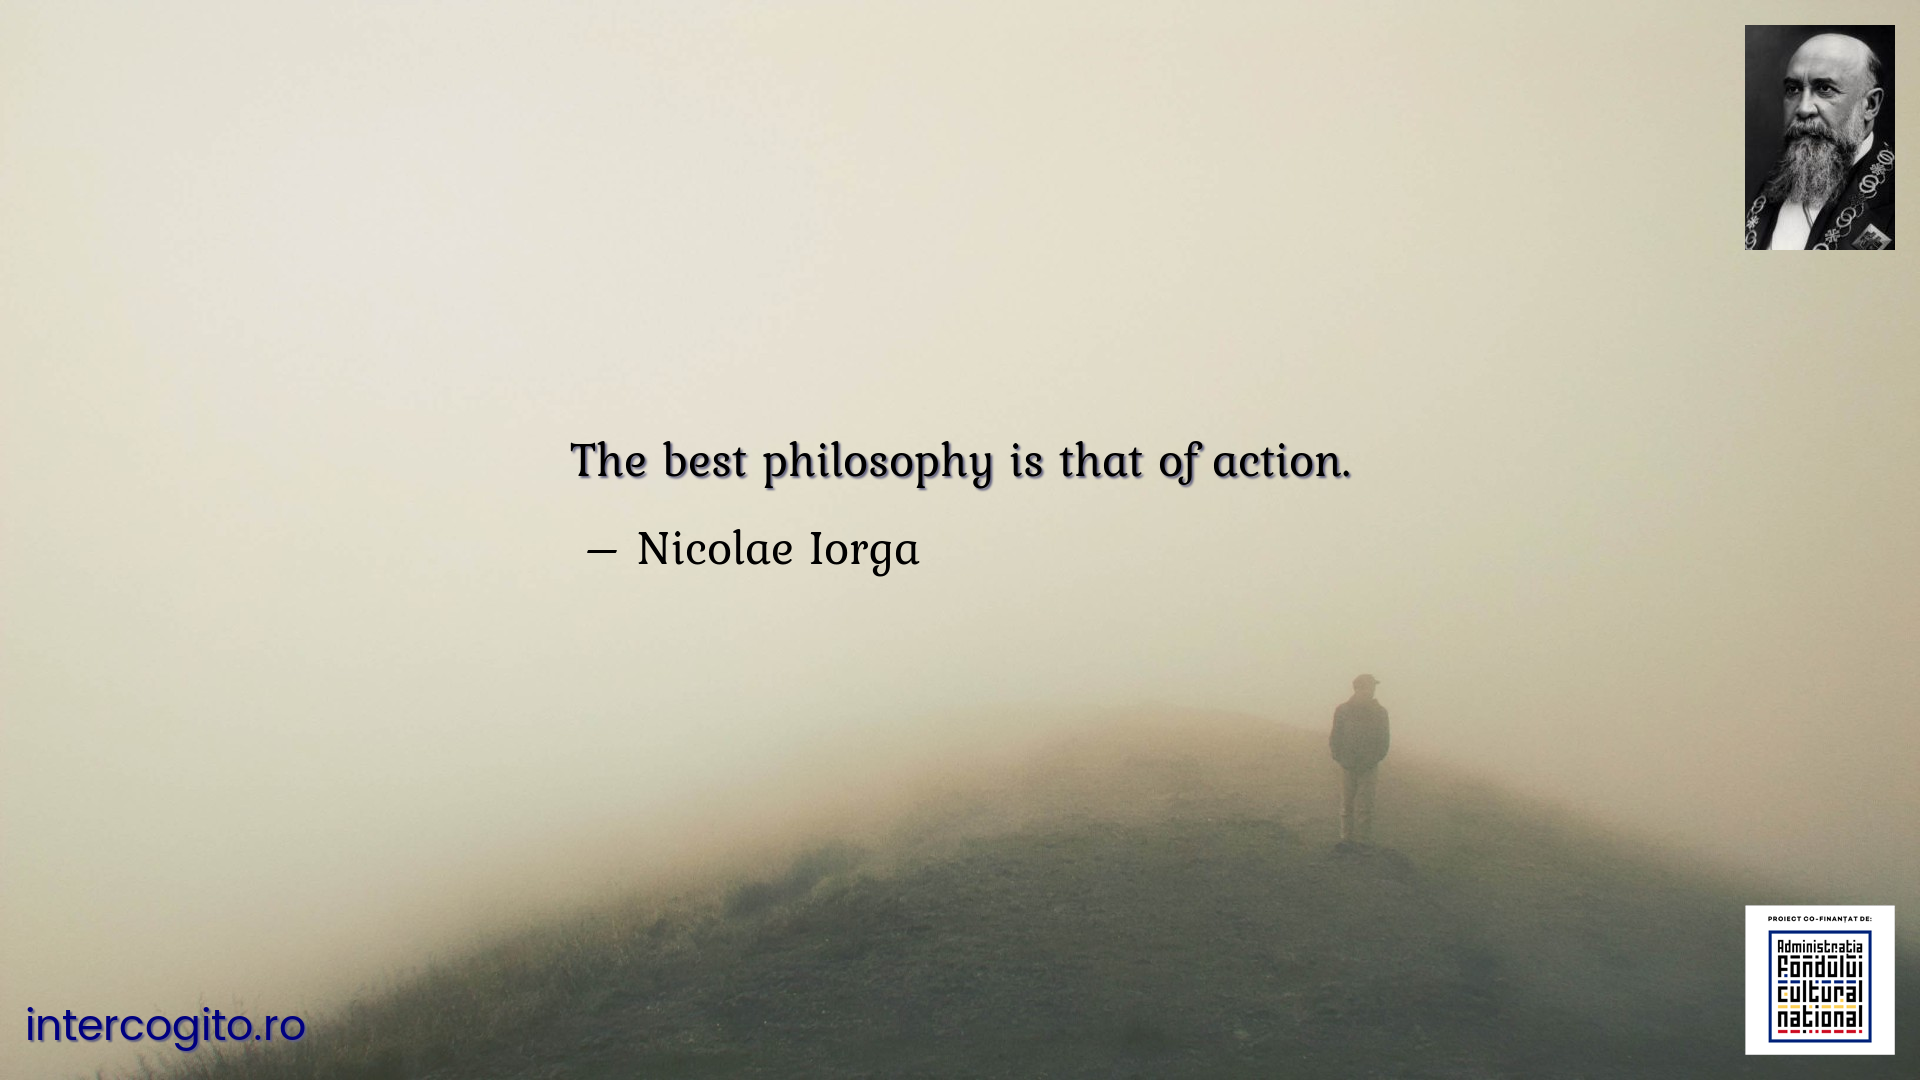 The best philosophy is that of action.